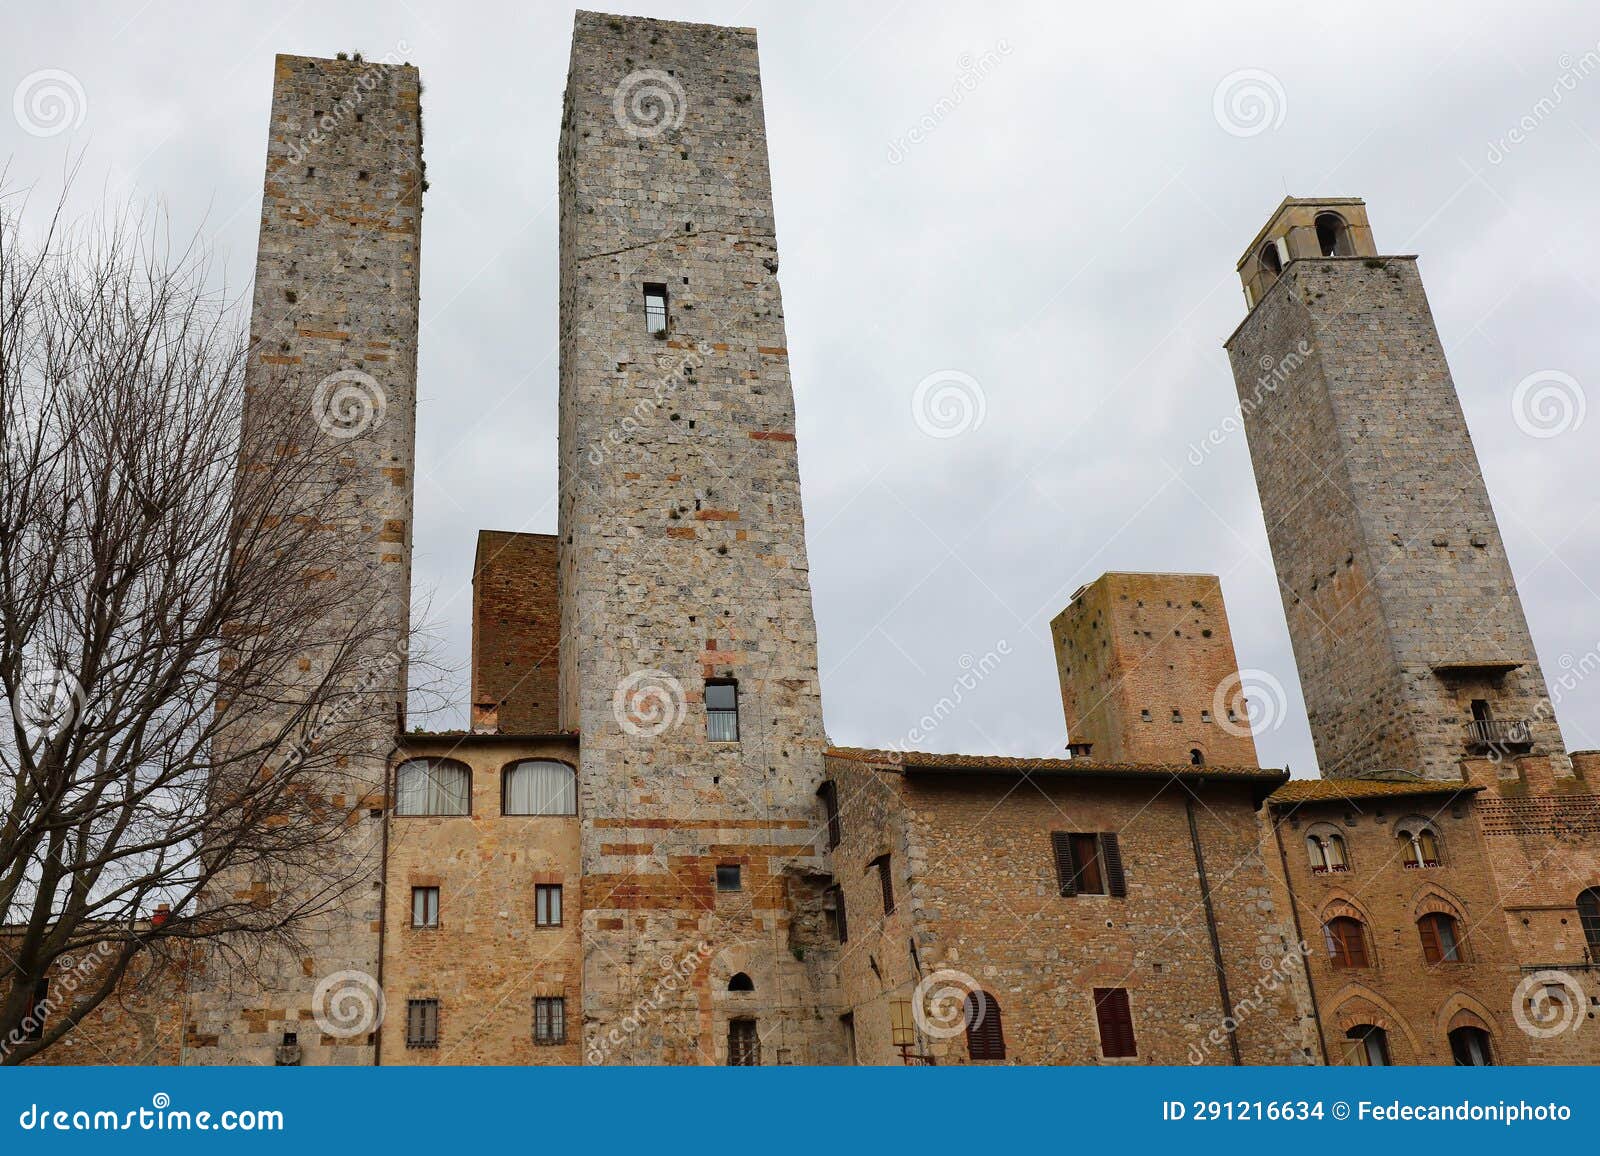 towers in the medieval village of san gimignano in the tuscany in italy